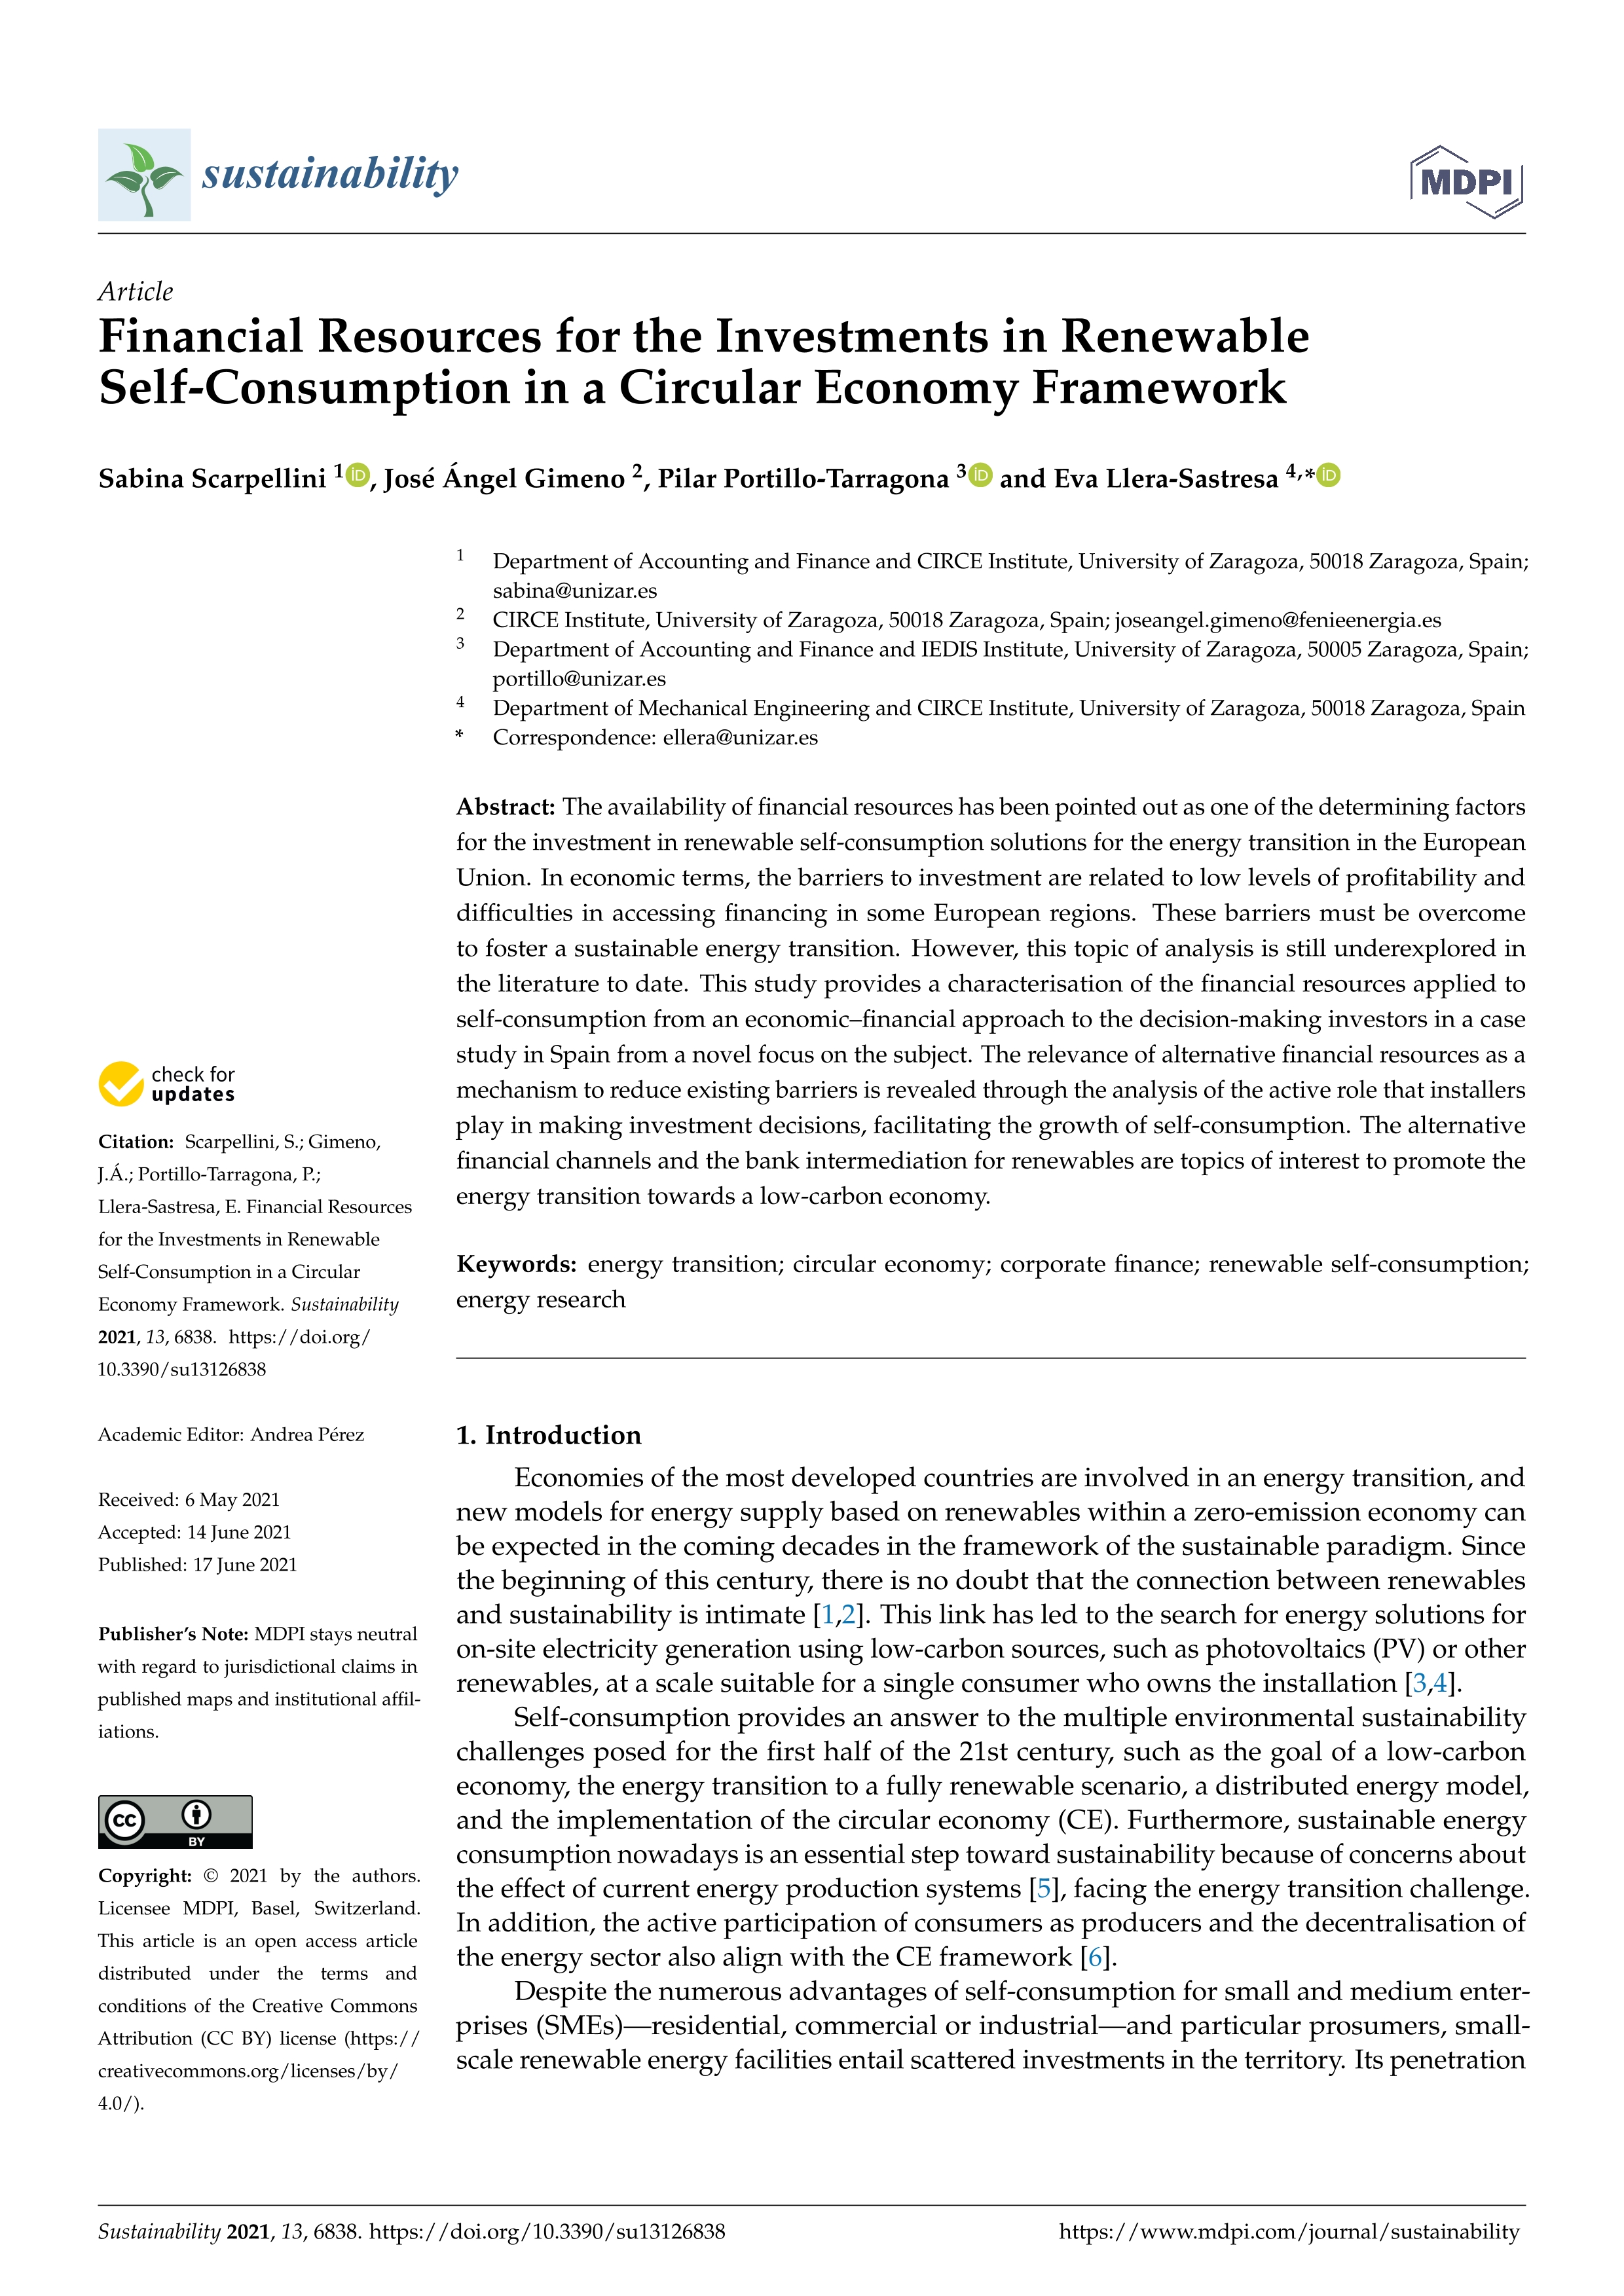 Financial Resources for the Investments in Renewable Self-Consumption in a Circular Economy Framework